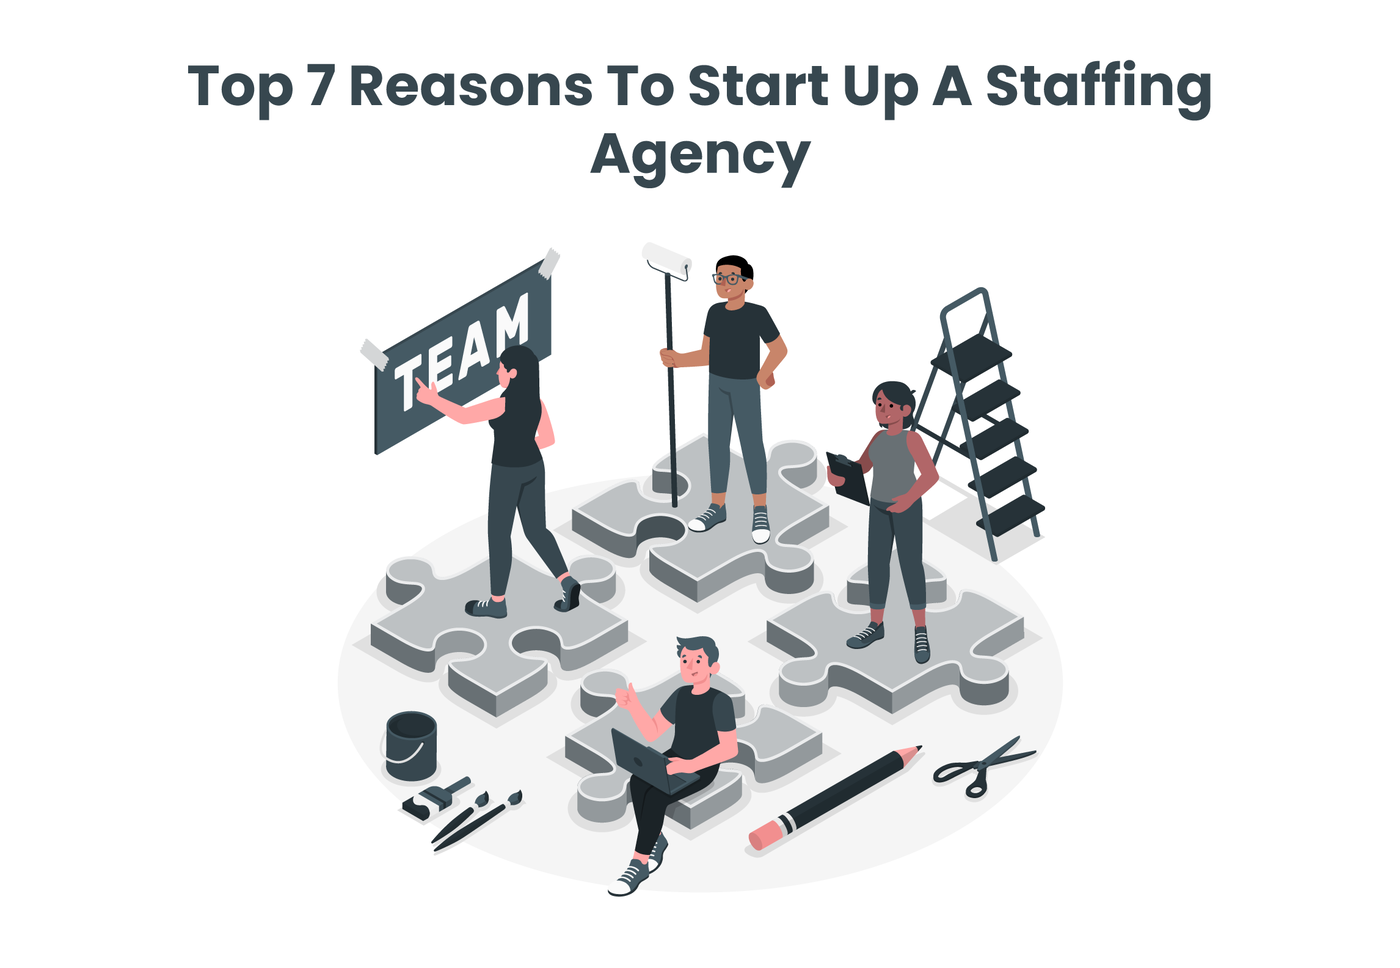 Top 7 Reasons To Start Up A Staffing Agency